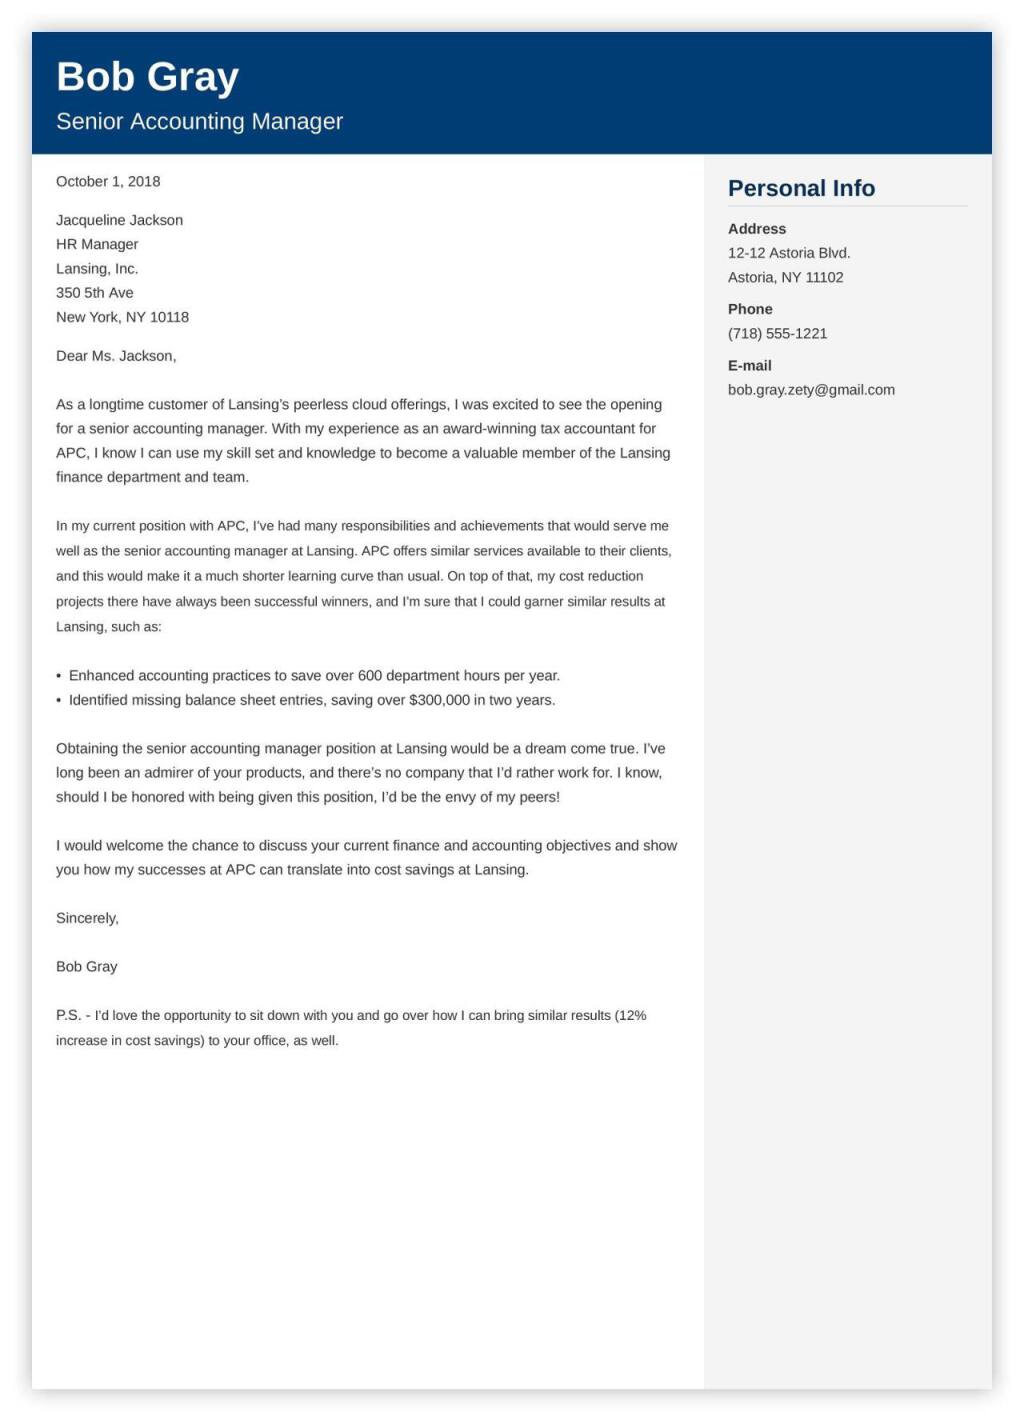 example of a cover letter for an accounting job